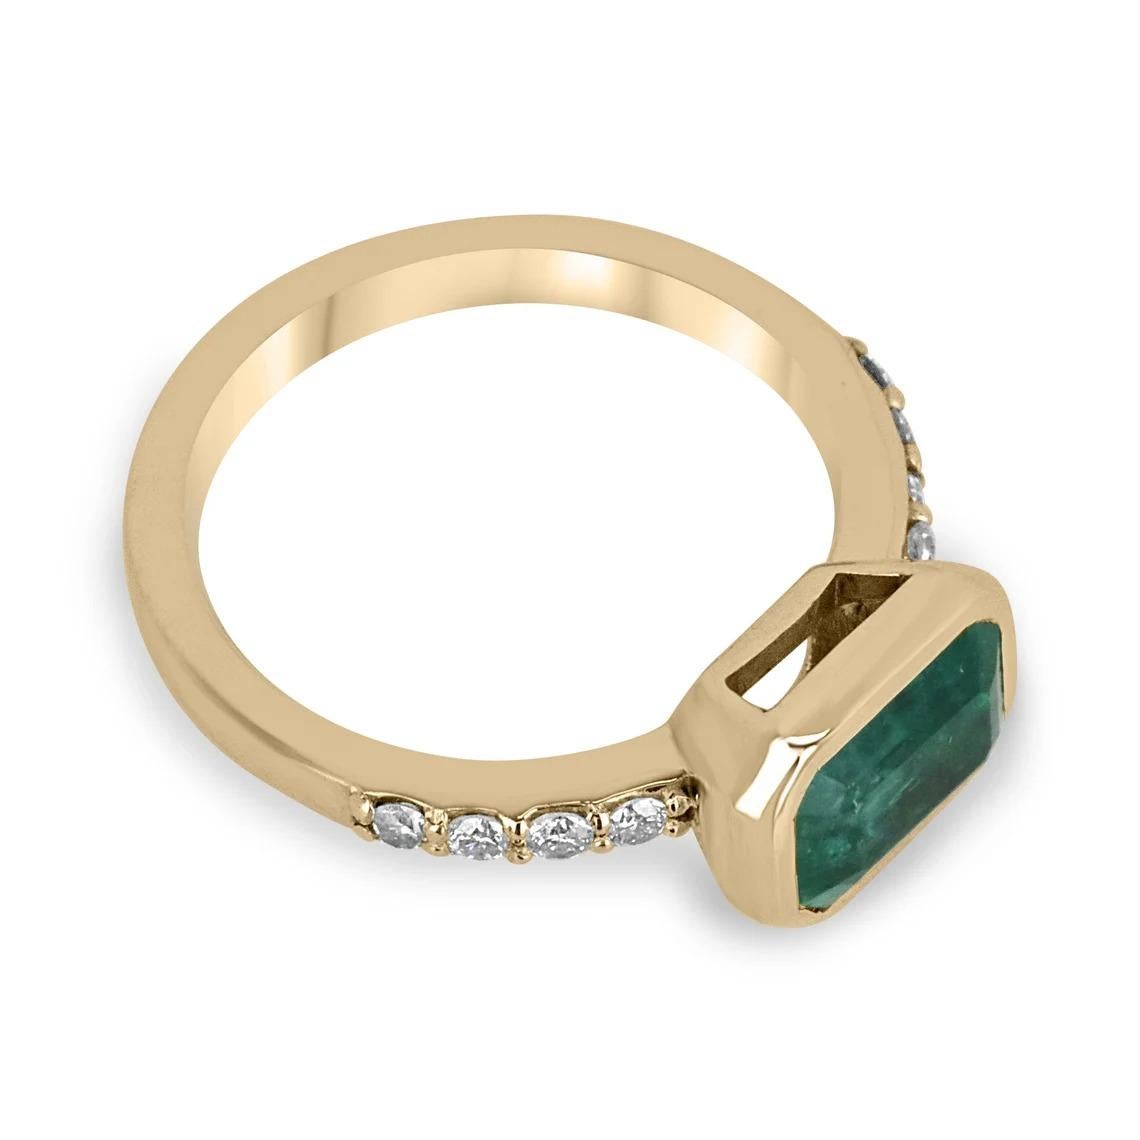 Displayed is a contemporary emerald and diamond engagement ring/right-hand ring in 14K yellow gold. This gorgeous ring carries a full 2.37-carat emerald cut emerald in a bezel setting which adds extra protection for the stone. Fully faceted, this